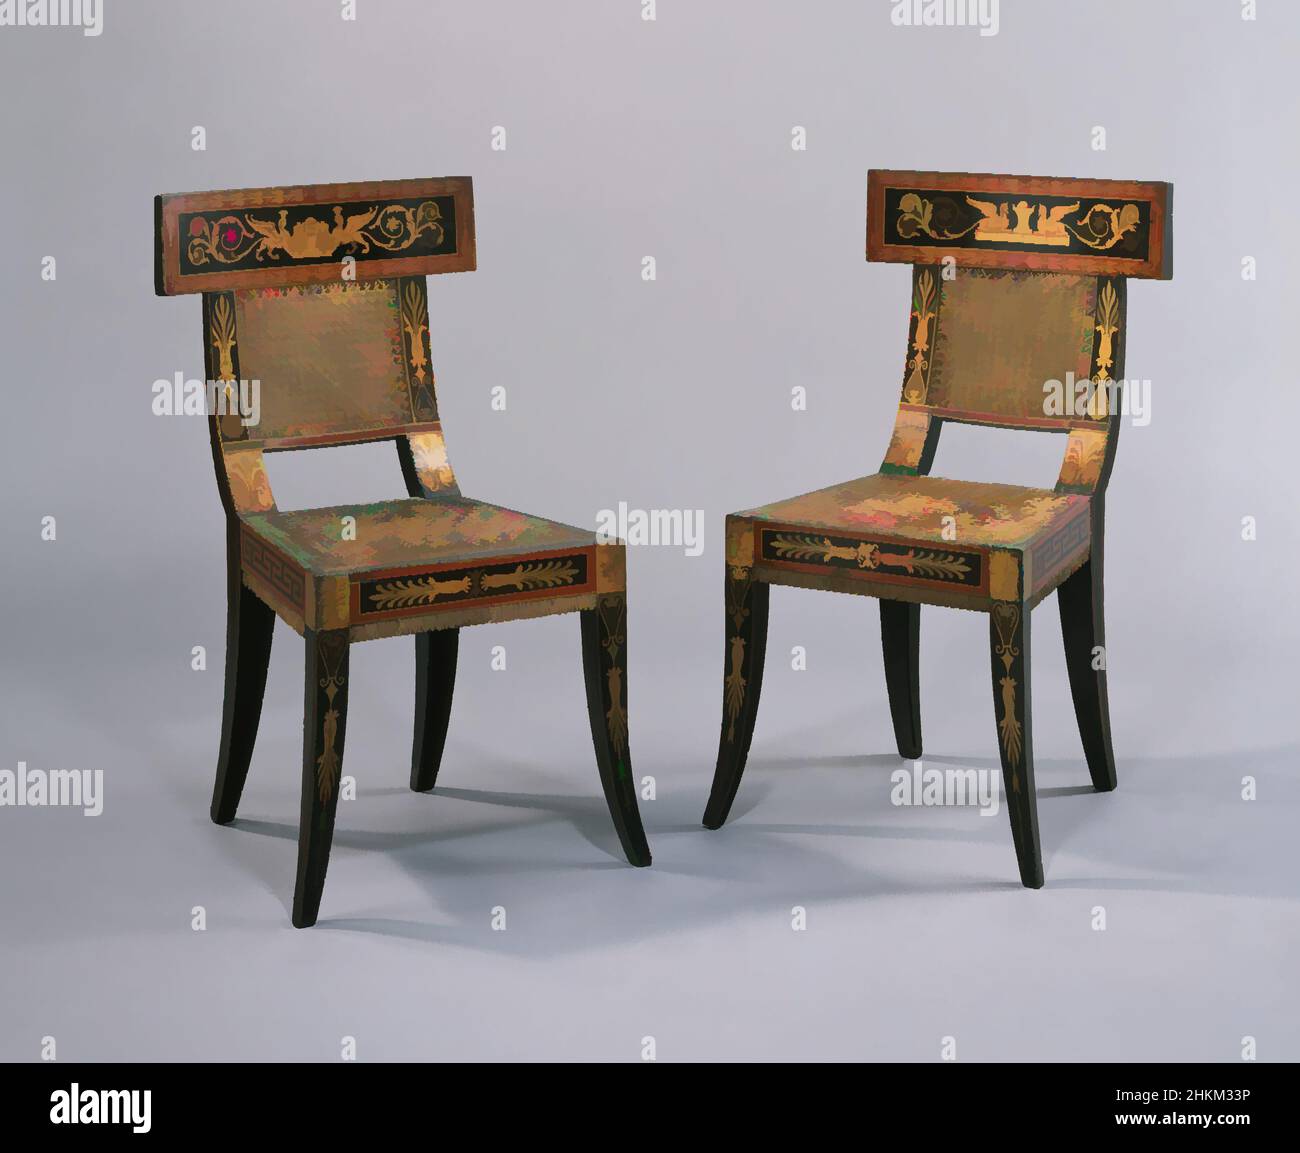 Art inspired by Pair of Chairs, Benjamin Henry Latrobe, American (born England), 1764-1820, George Bridport, American (born England), 1783-1819, 1808, Painted and gilded yellow poplar, white oak, and white pine; gilded gesso; replacement and original gilded cane; and reproduction wool, Classic works modernized by Artotop with a splash of modernity. Shapes, color and value, eye-catching visual impact on art. Emotions through freedom of artworks in a contemporary way. A timeless message pursuing a wildly creative new direction. Artists turning to the digital medium and creating the Artotop NFT Stock Photo